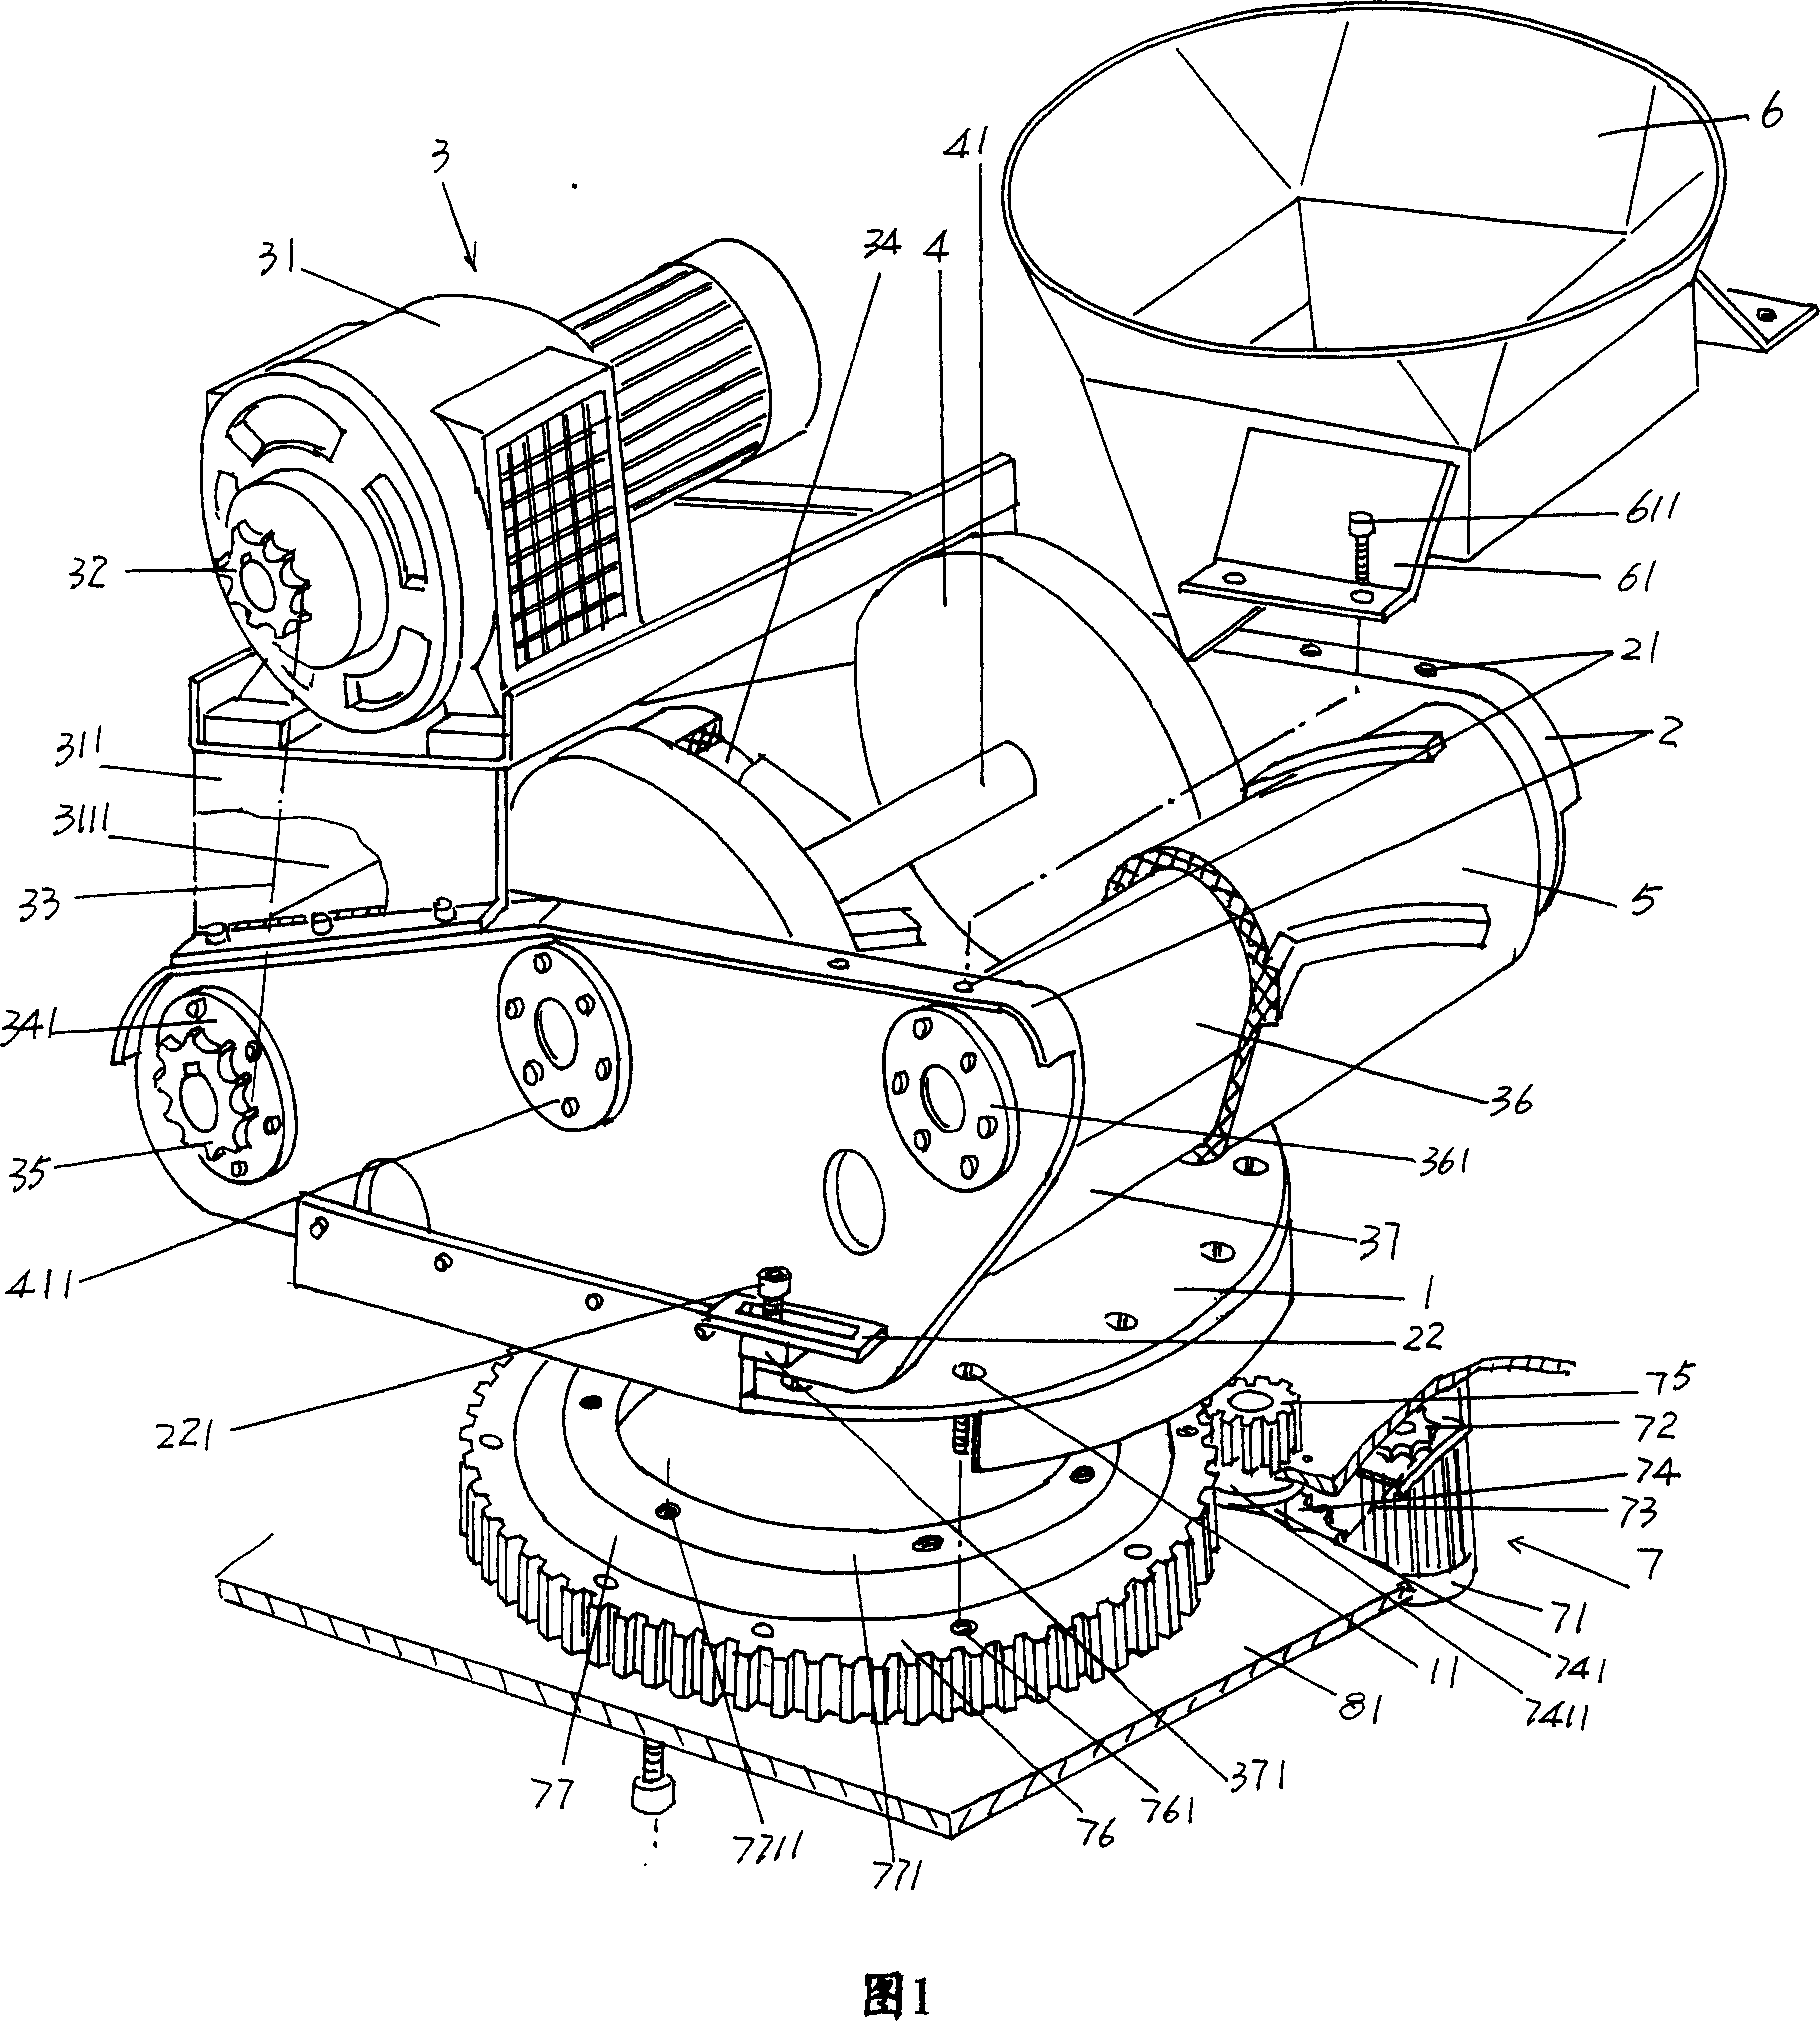 Throwing mechanism for cabin cleaning vehicle